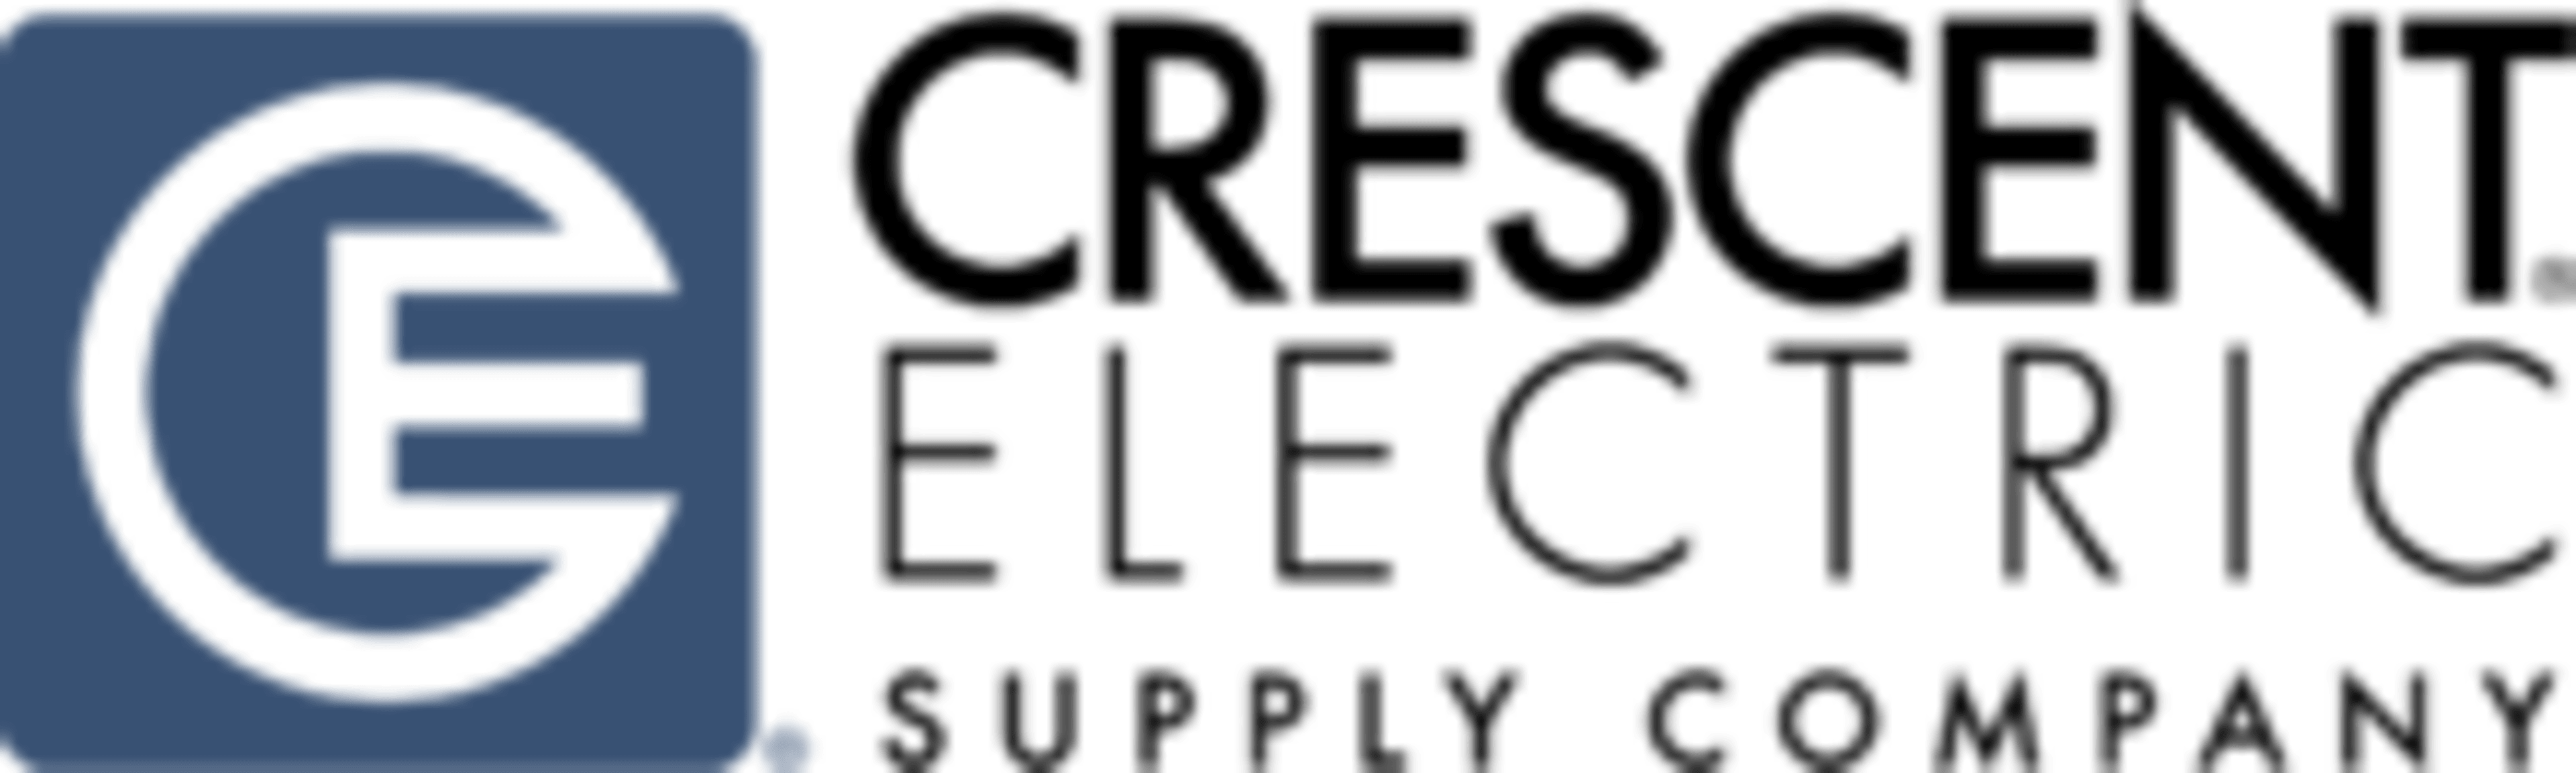 Crescent Electric Supply Company Code